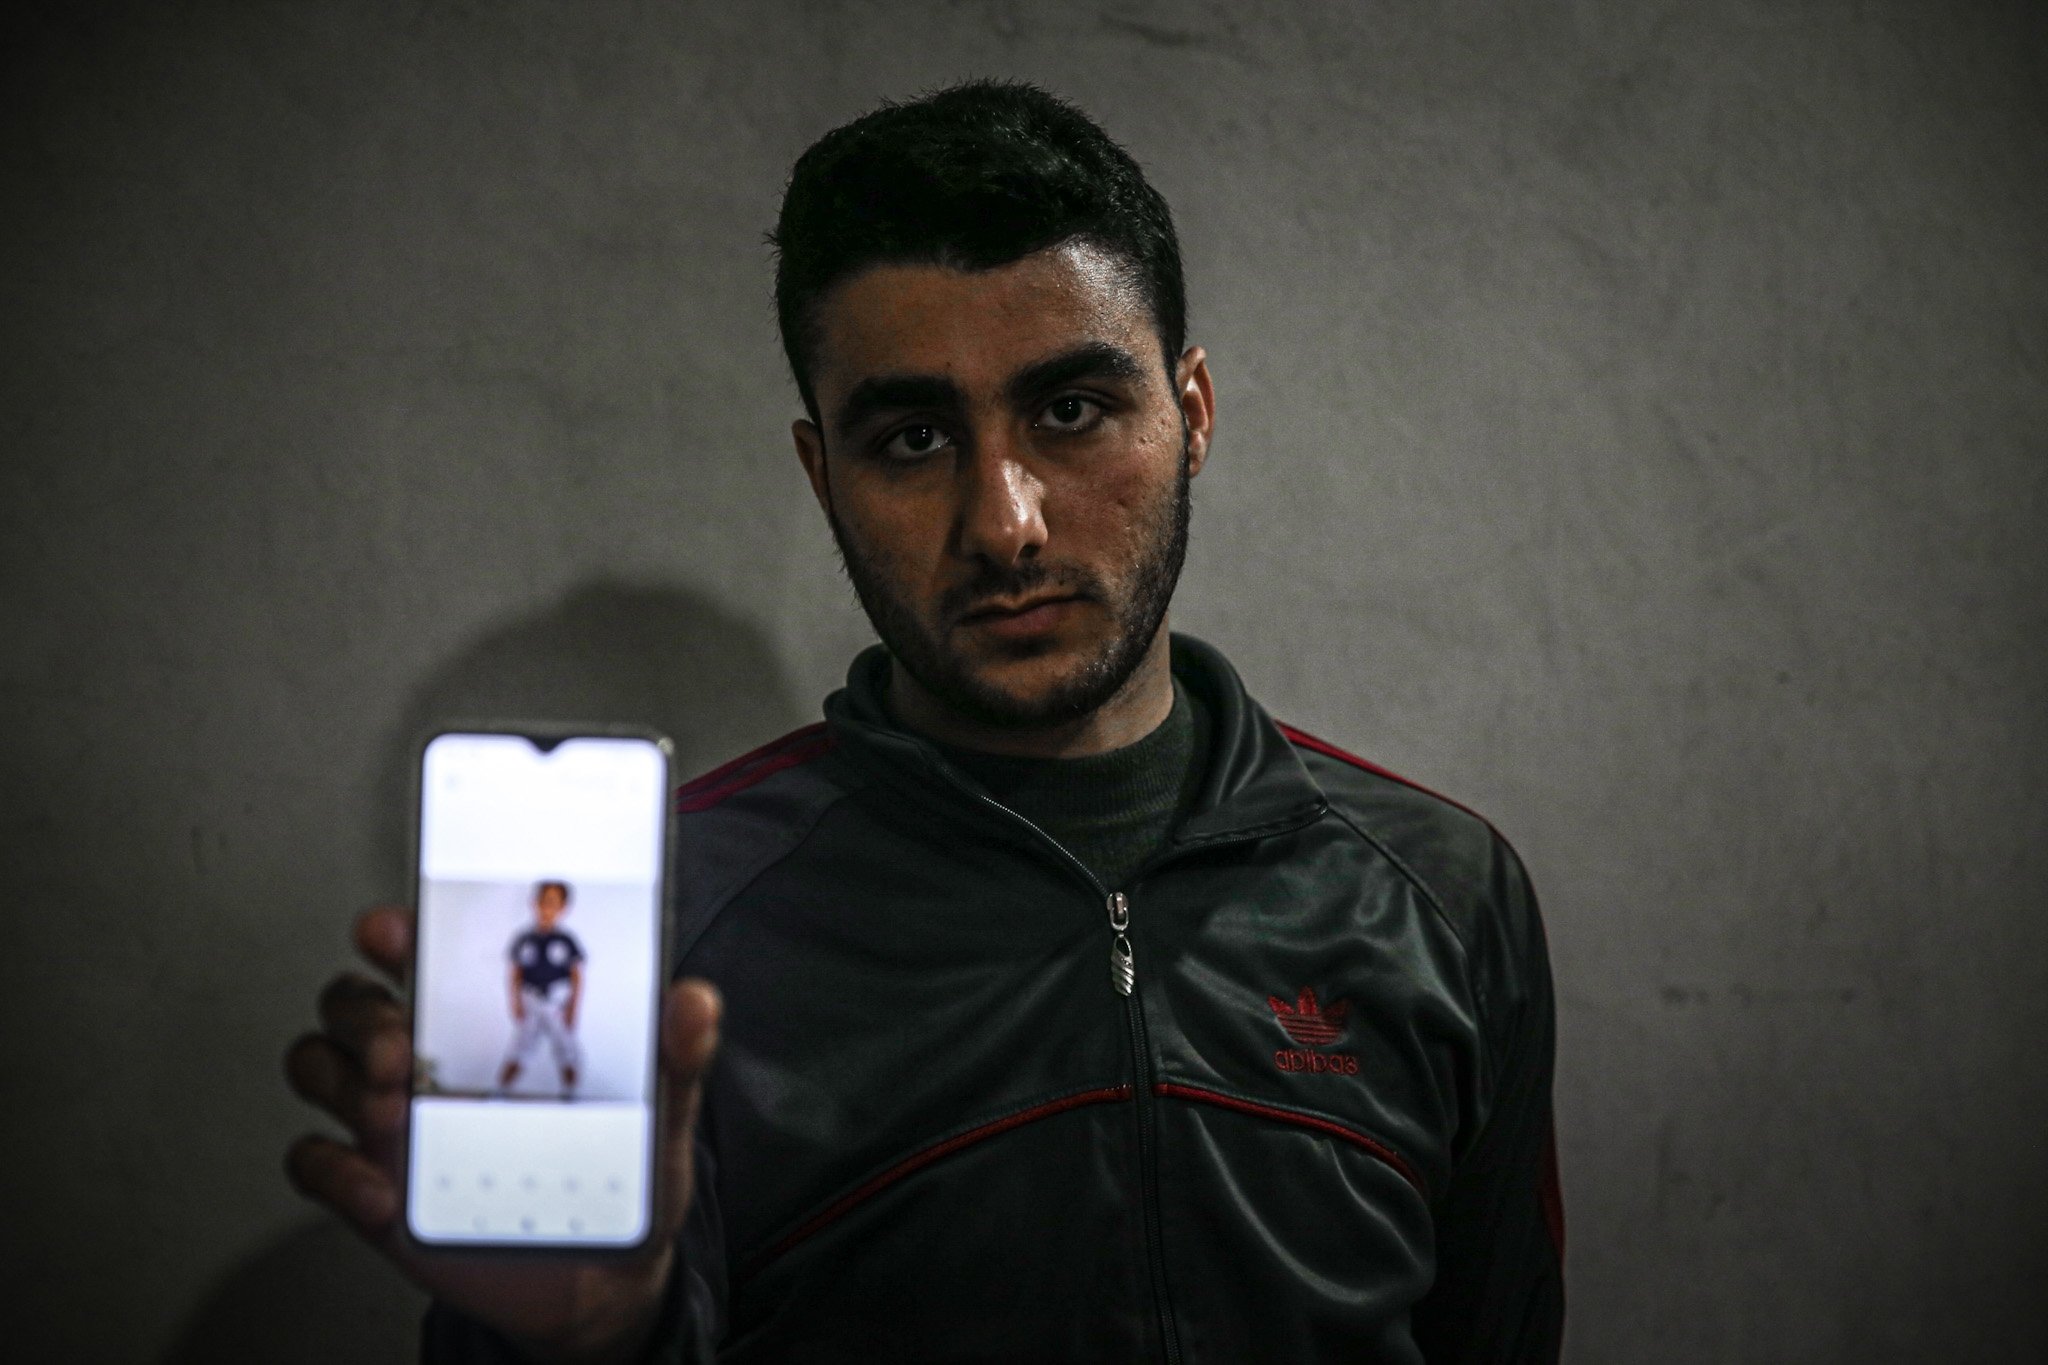  Khan Shaykhun Civil Defense Media Officer Hamid Kattini holds an interview with Anadolu Agency within the 4th year of the chemical weapons massacre over Khan Shaykhun carried out by Assad Regime in Syria on April 3, 2020.
  ( Muhammed Said - Anadolu Ajansı )